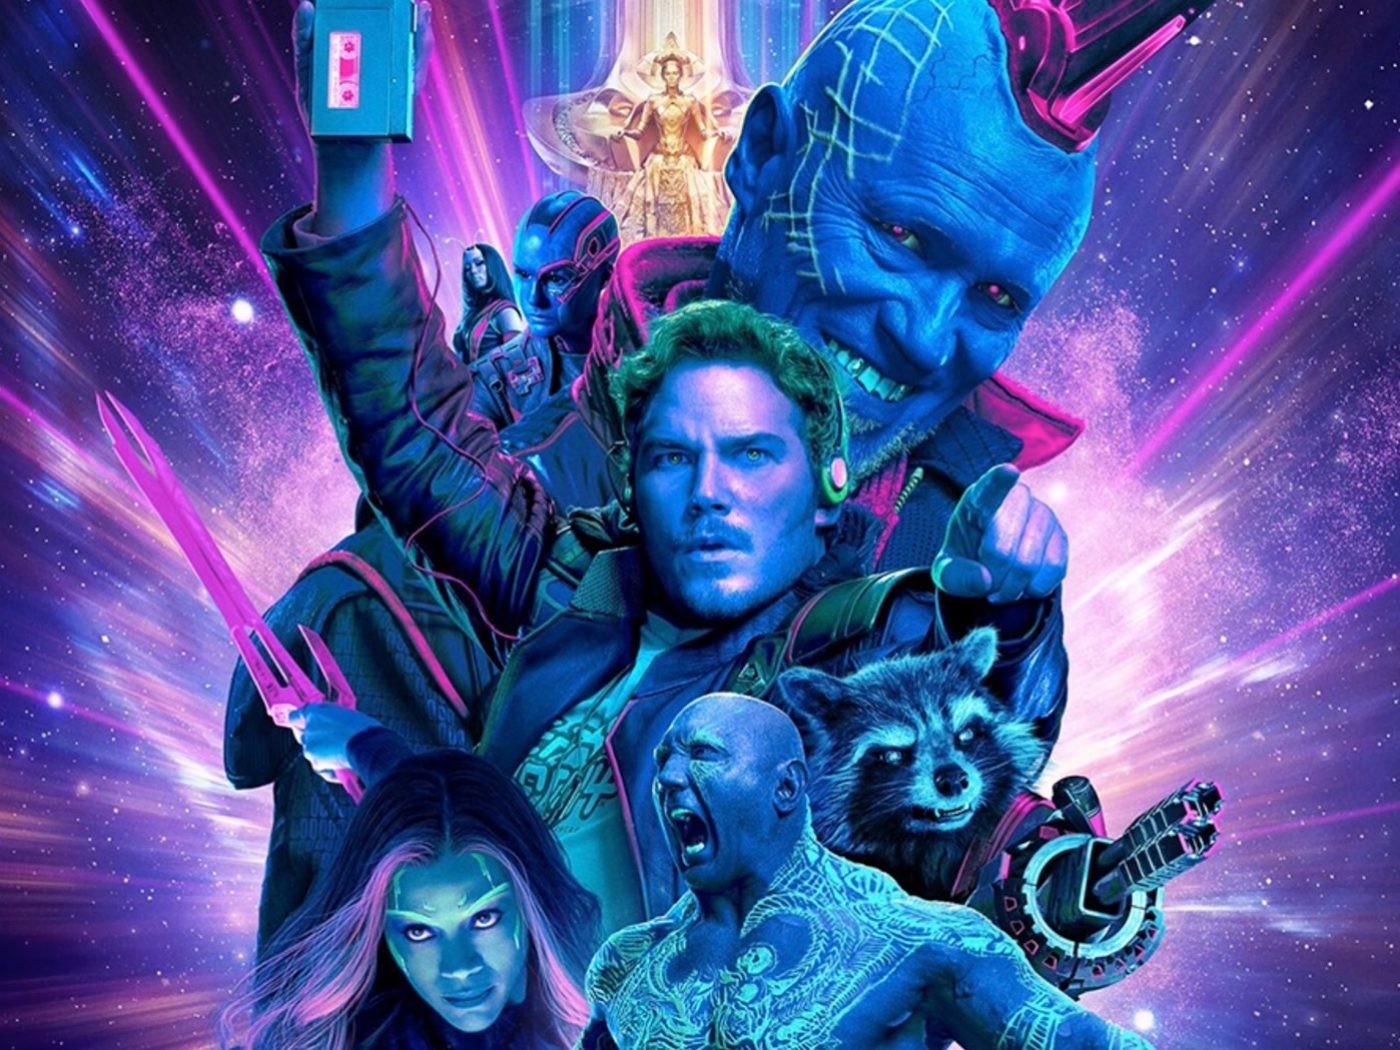 Guardians of the Galaxy 4 might introduce a brand new team of heroes